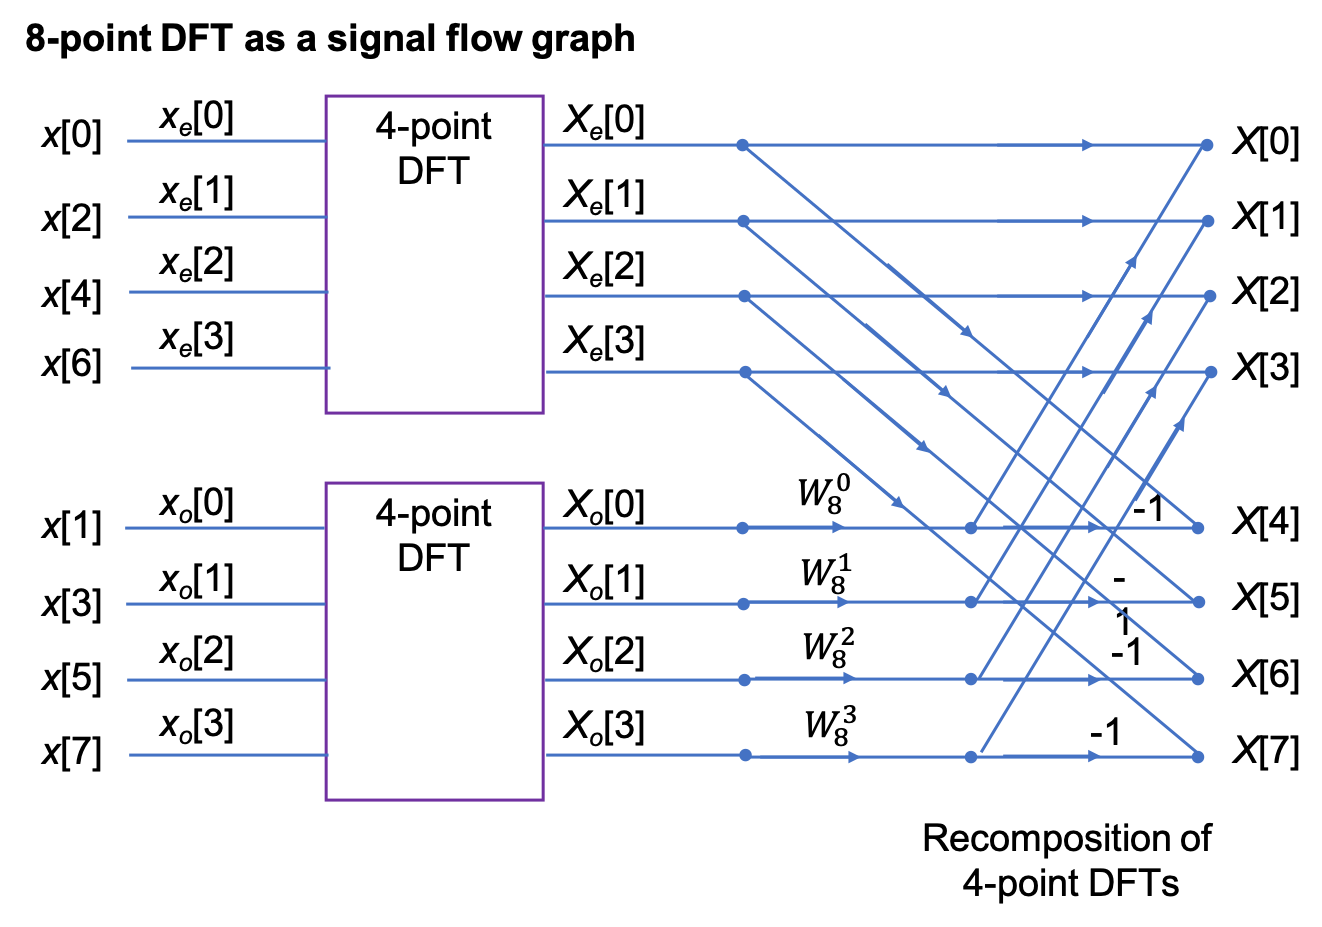 Signal flow graph of 8-point DFT